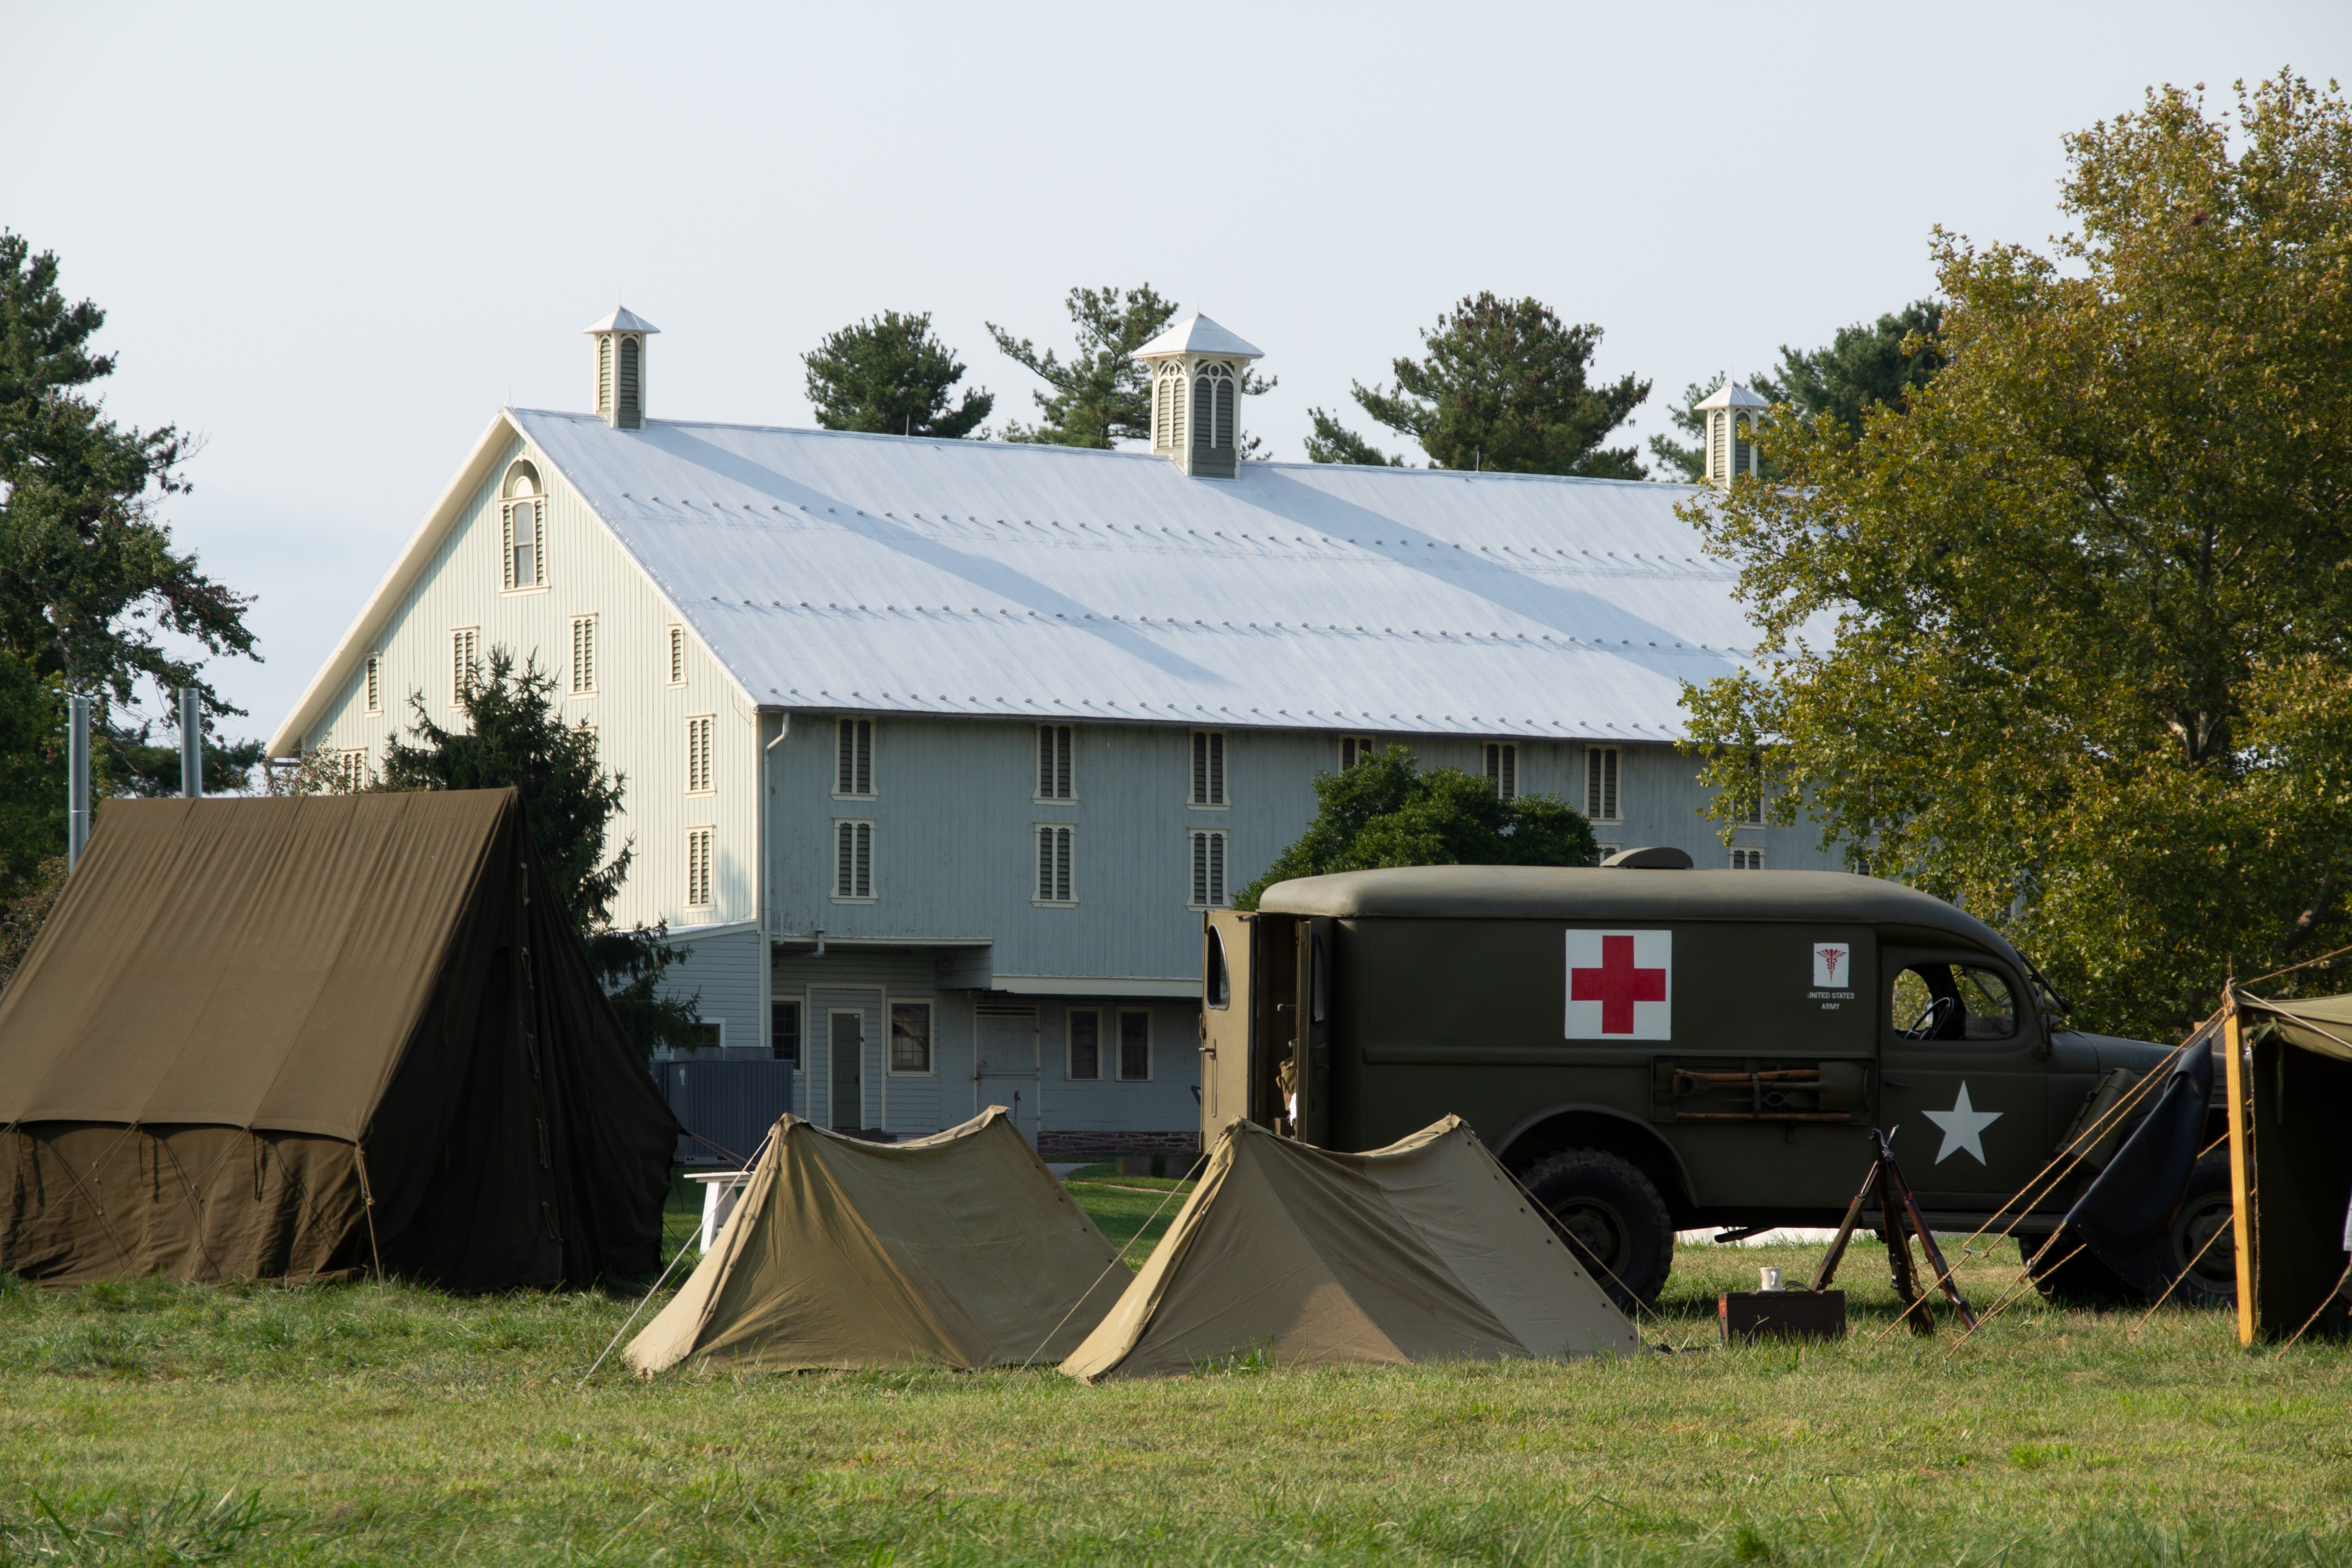 A large white barn stands in the distance with World War II tents and medical truck are in the foreground.